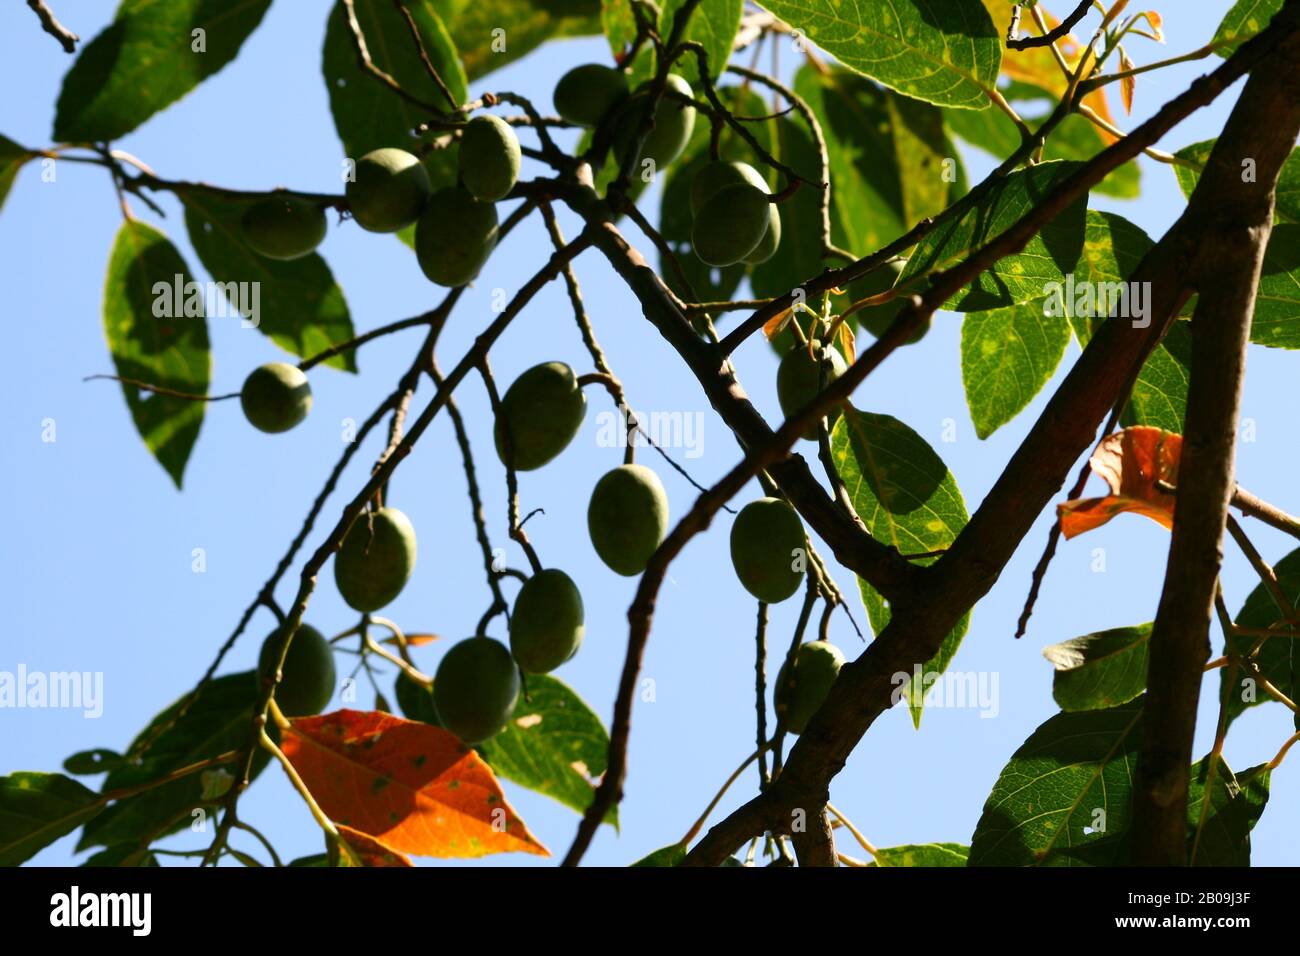 The Indian olive fruit, known and consumed locally as "jalpai". Bangladesh.  Oct, 2007 Stock Photo - Alamy